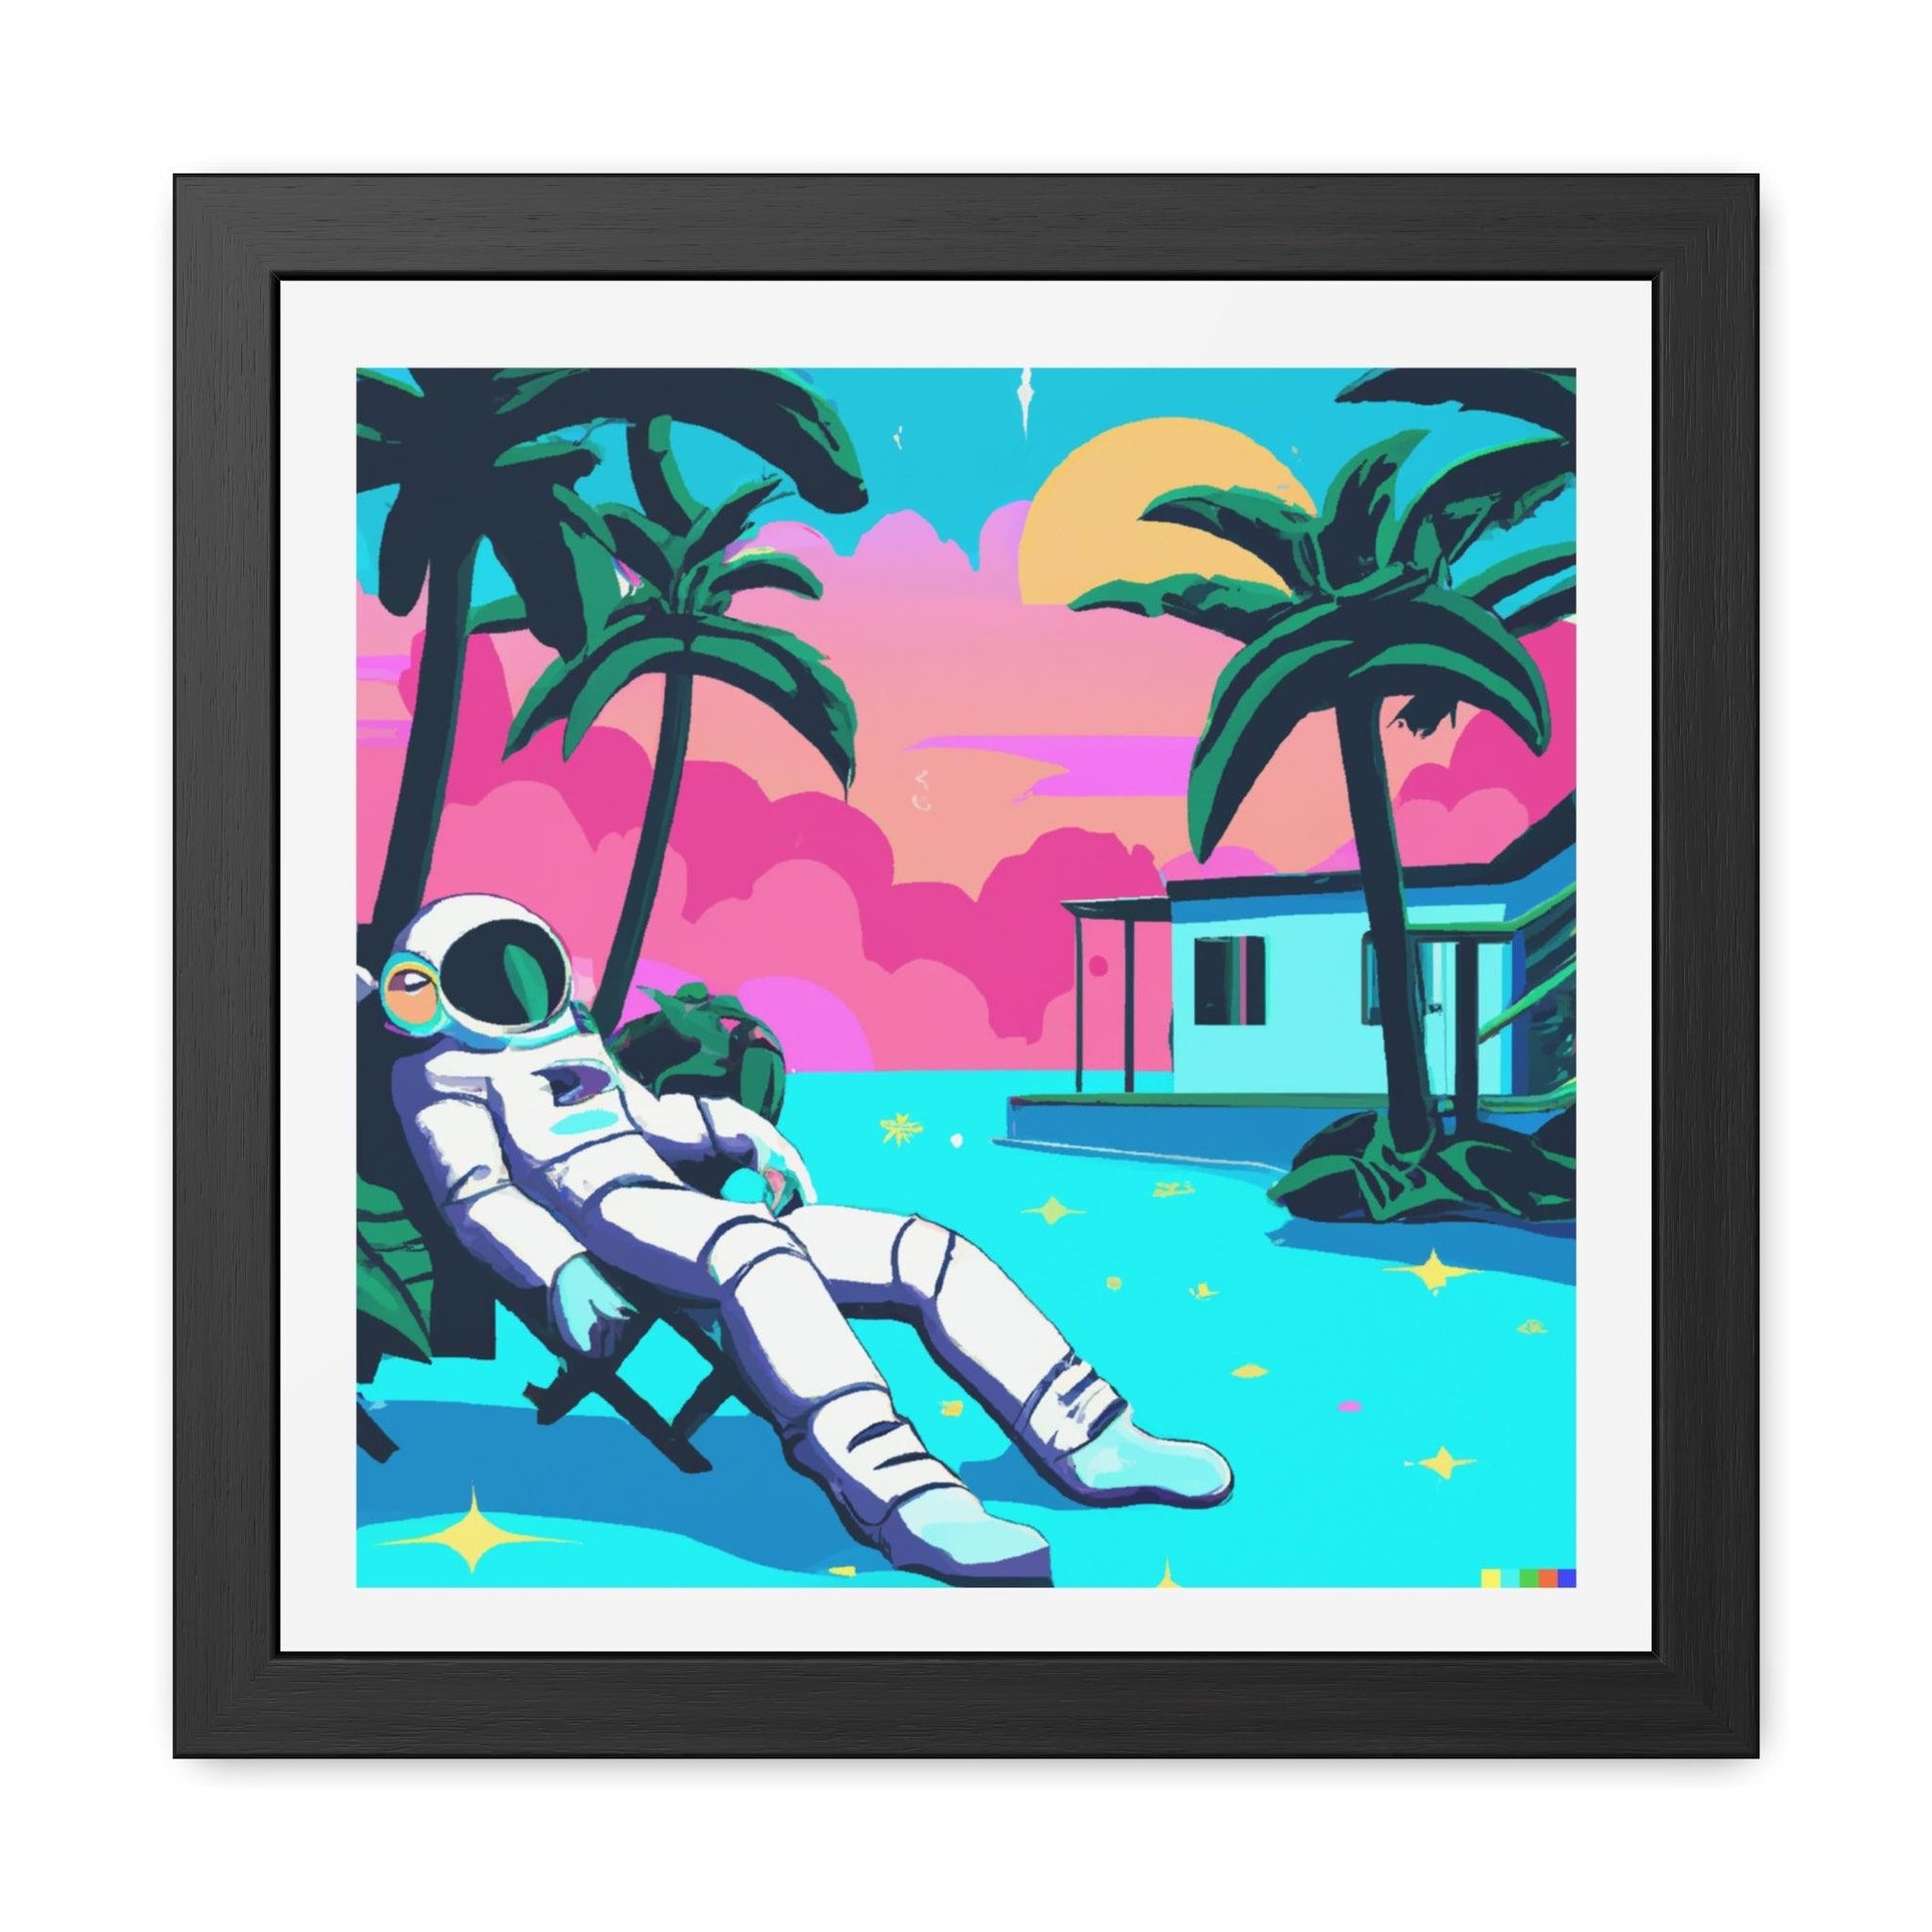 Lounging Astronaut Framed Poster Wall Art - MAIA HOMES